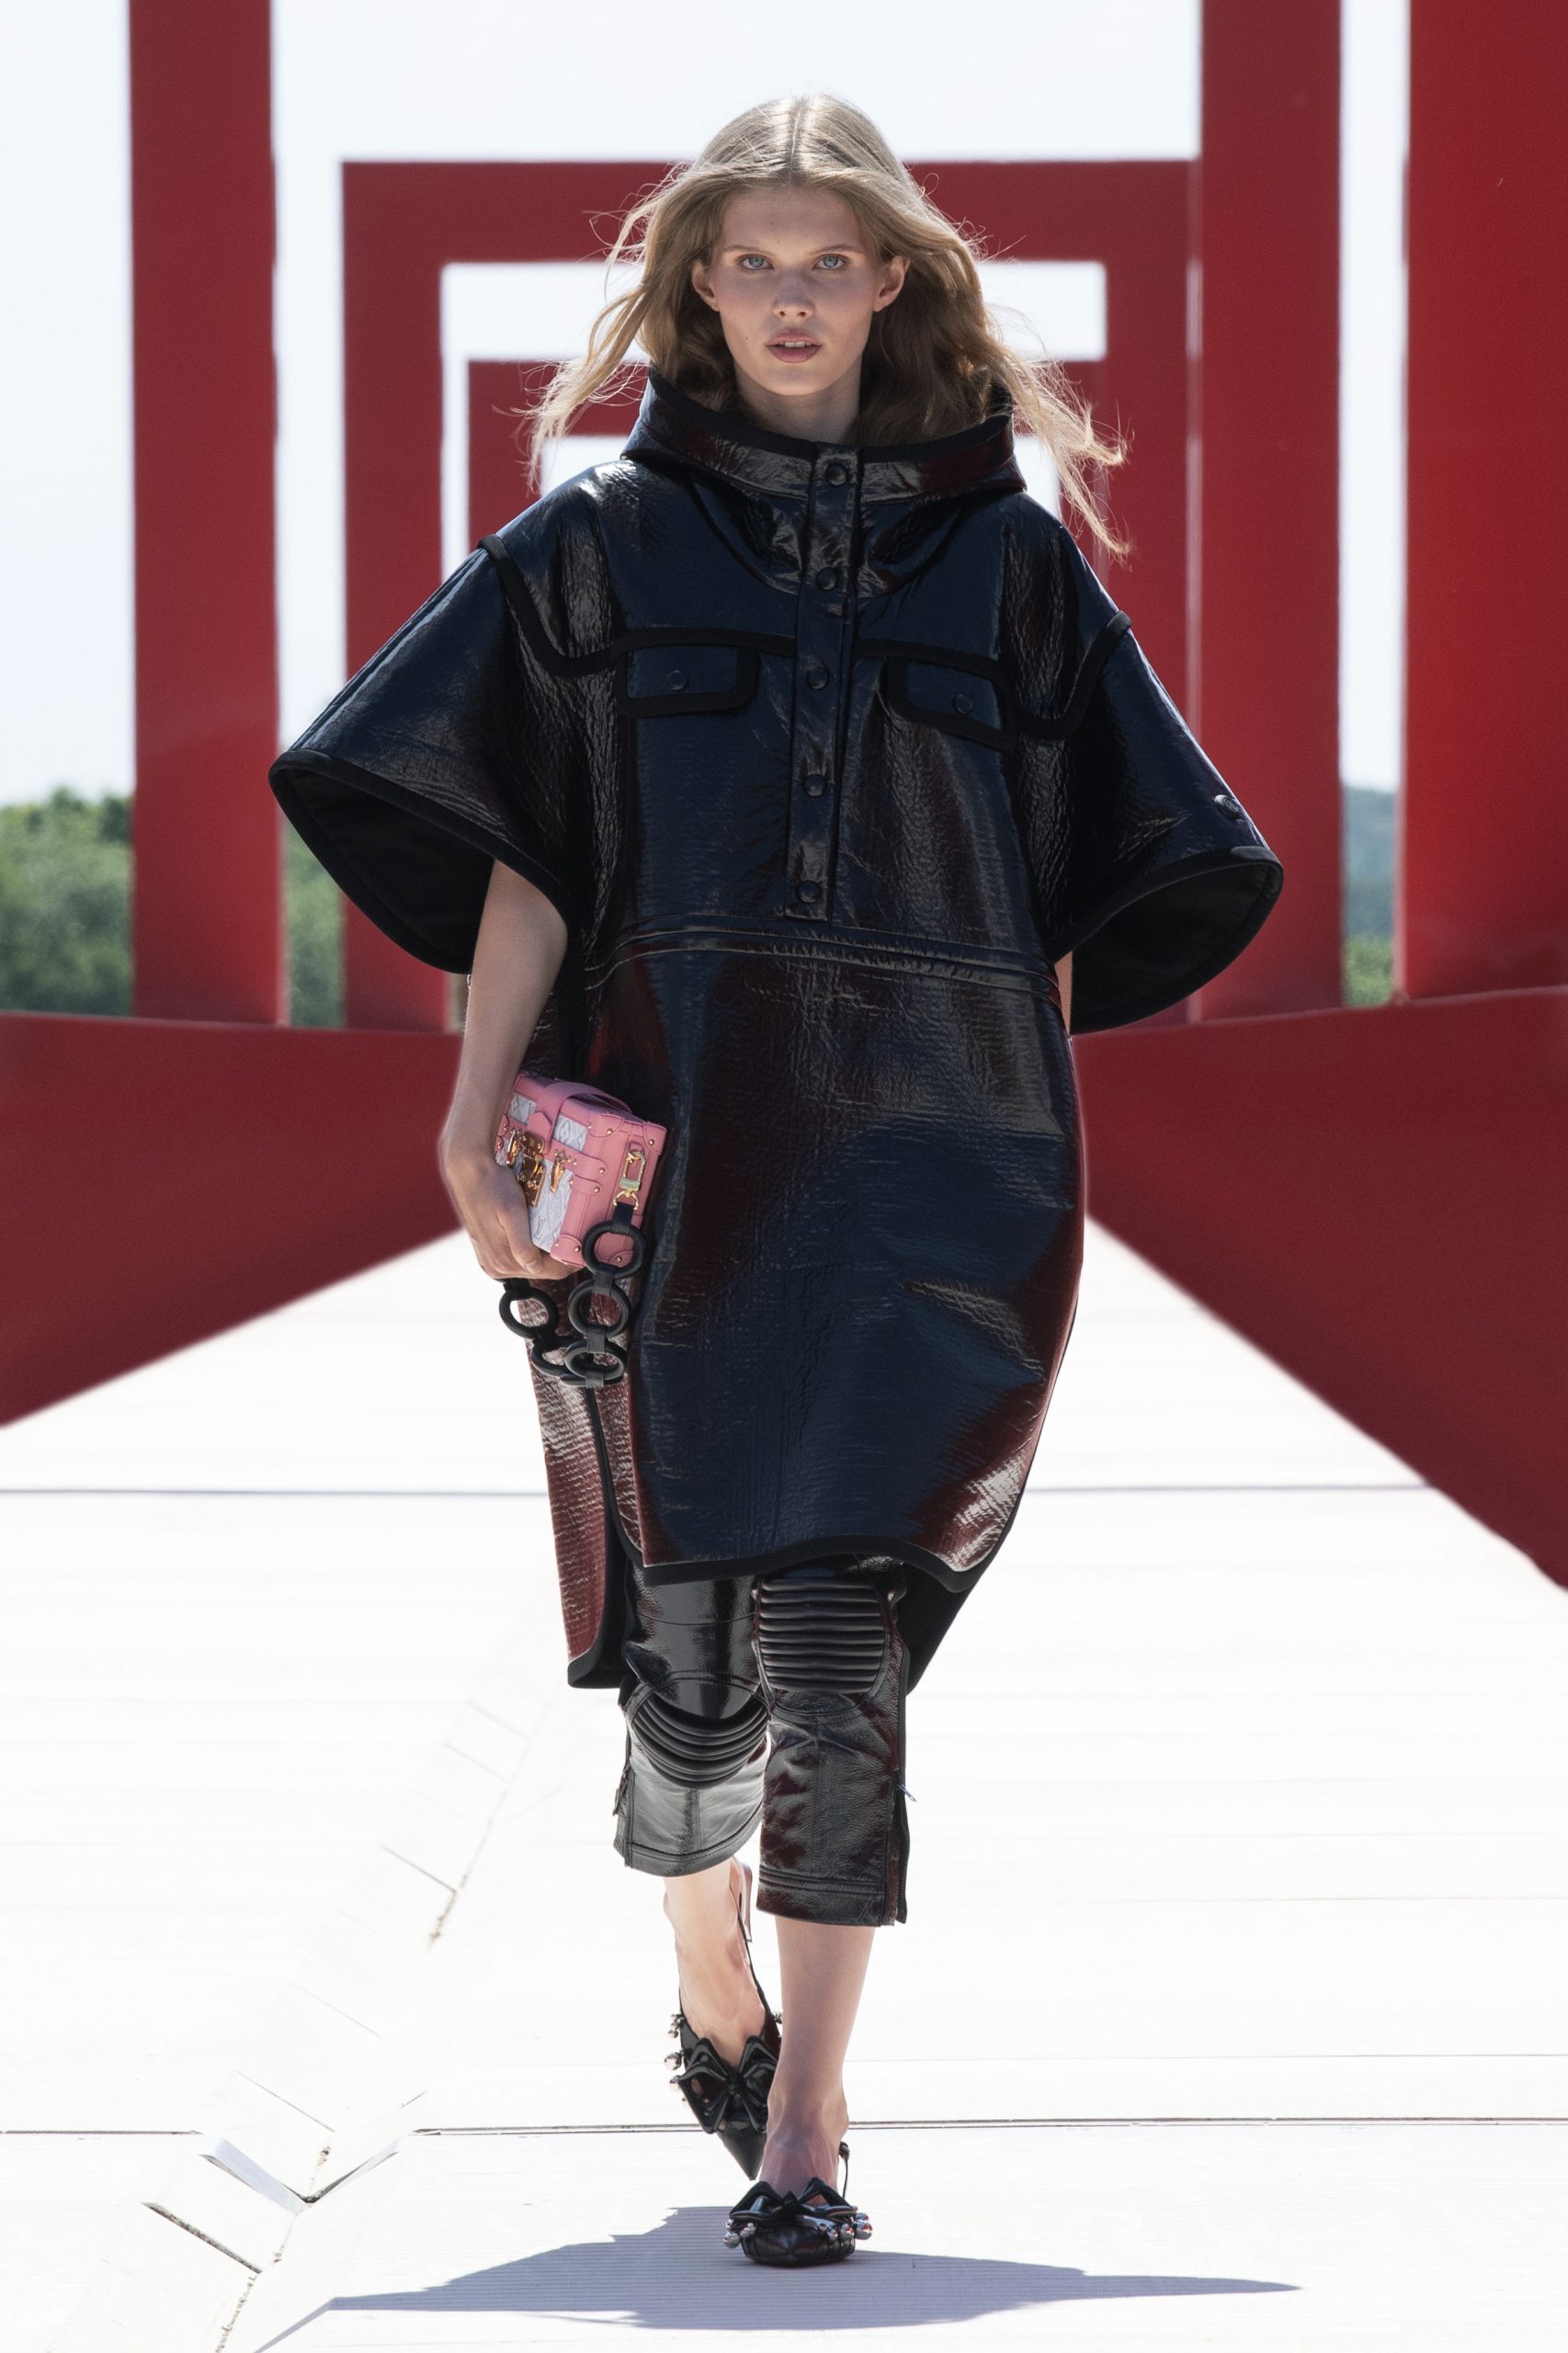 Best Looks From the Louis Vuitton Resort 2019 Show, by iFashion Network